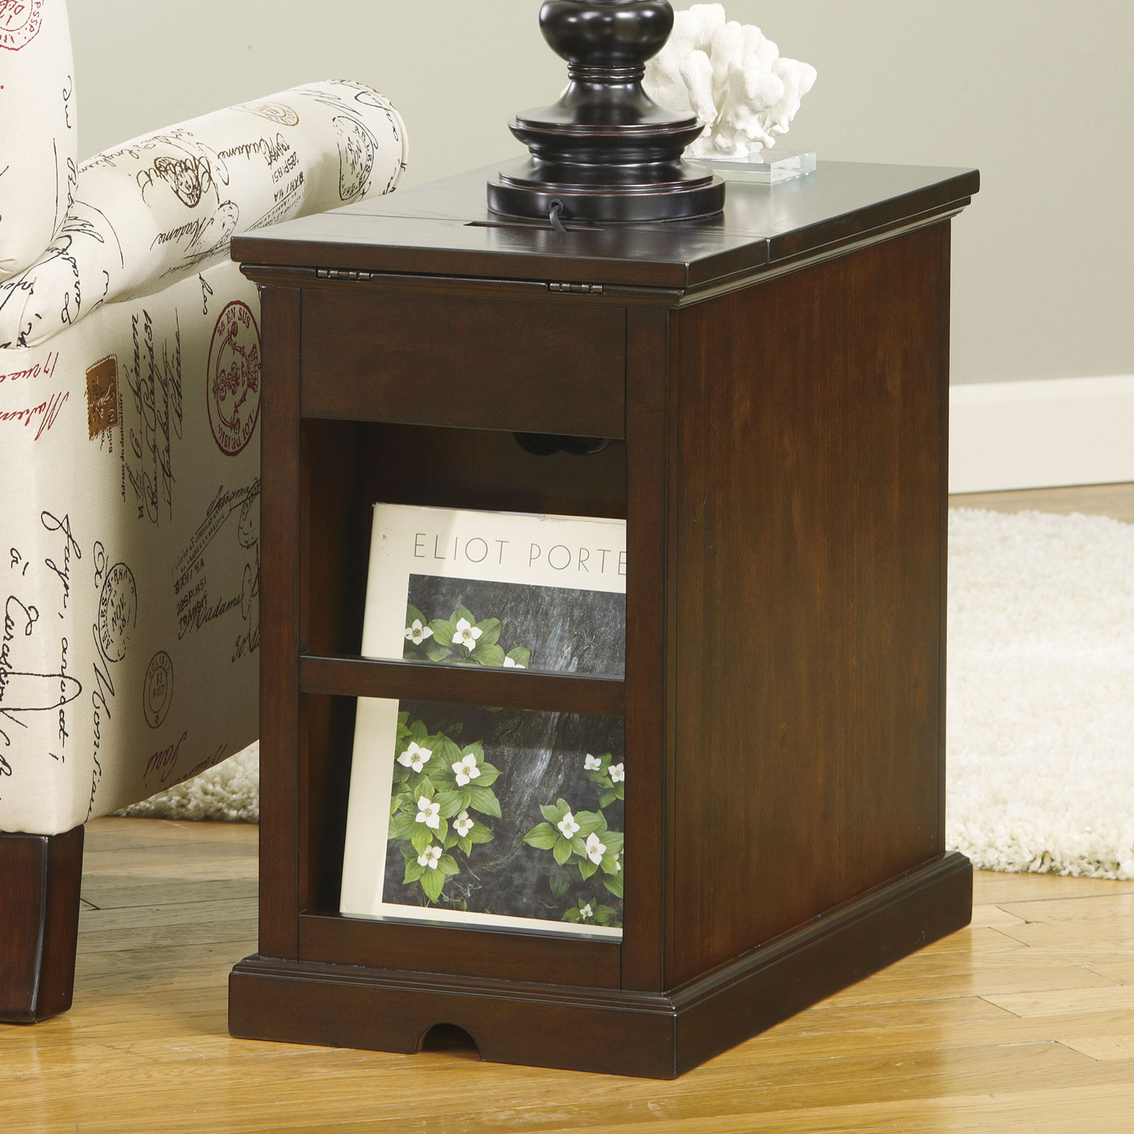 Signature Design By Ashley Laflorn Chairside End Table - Image 2 of 3